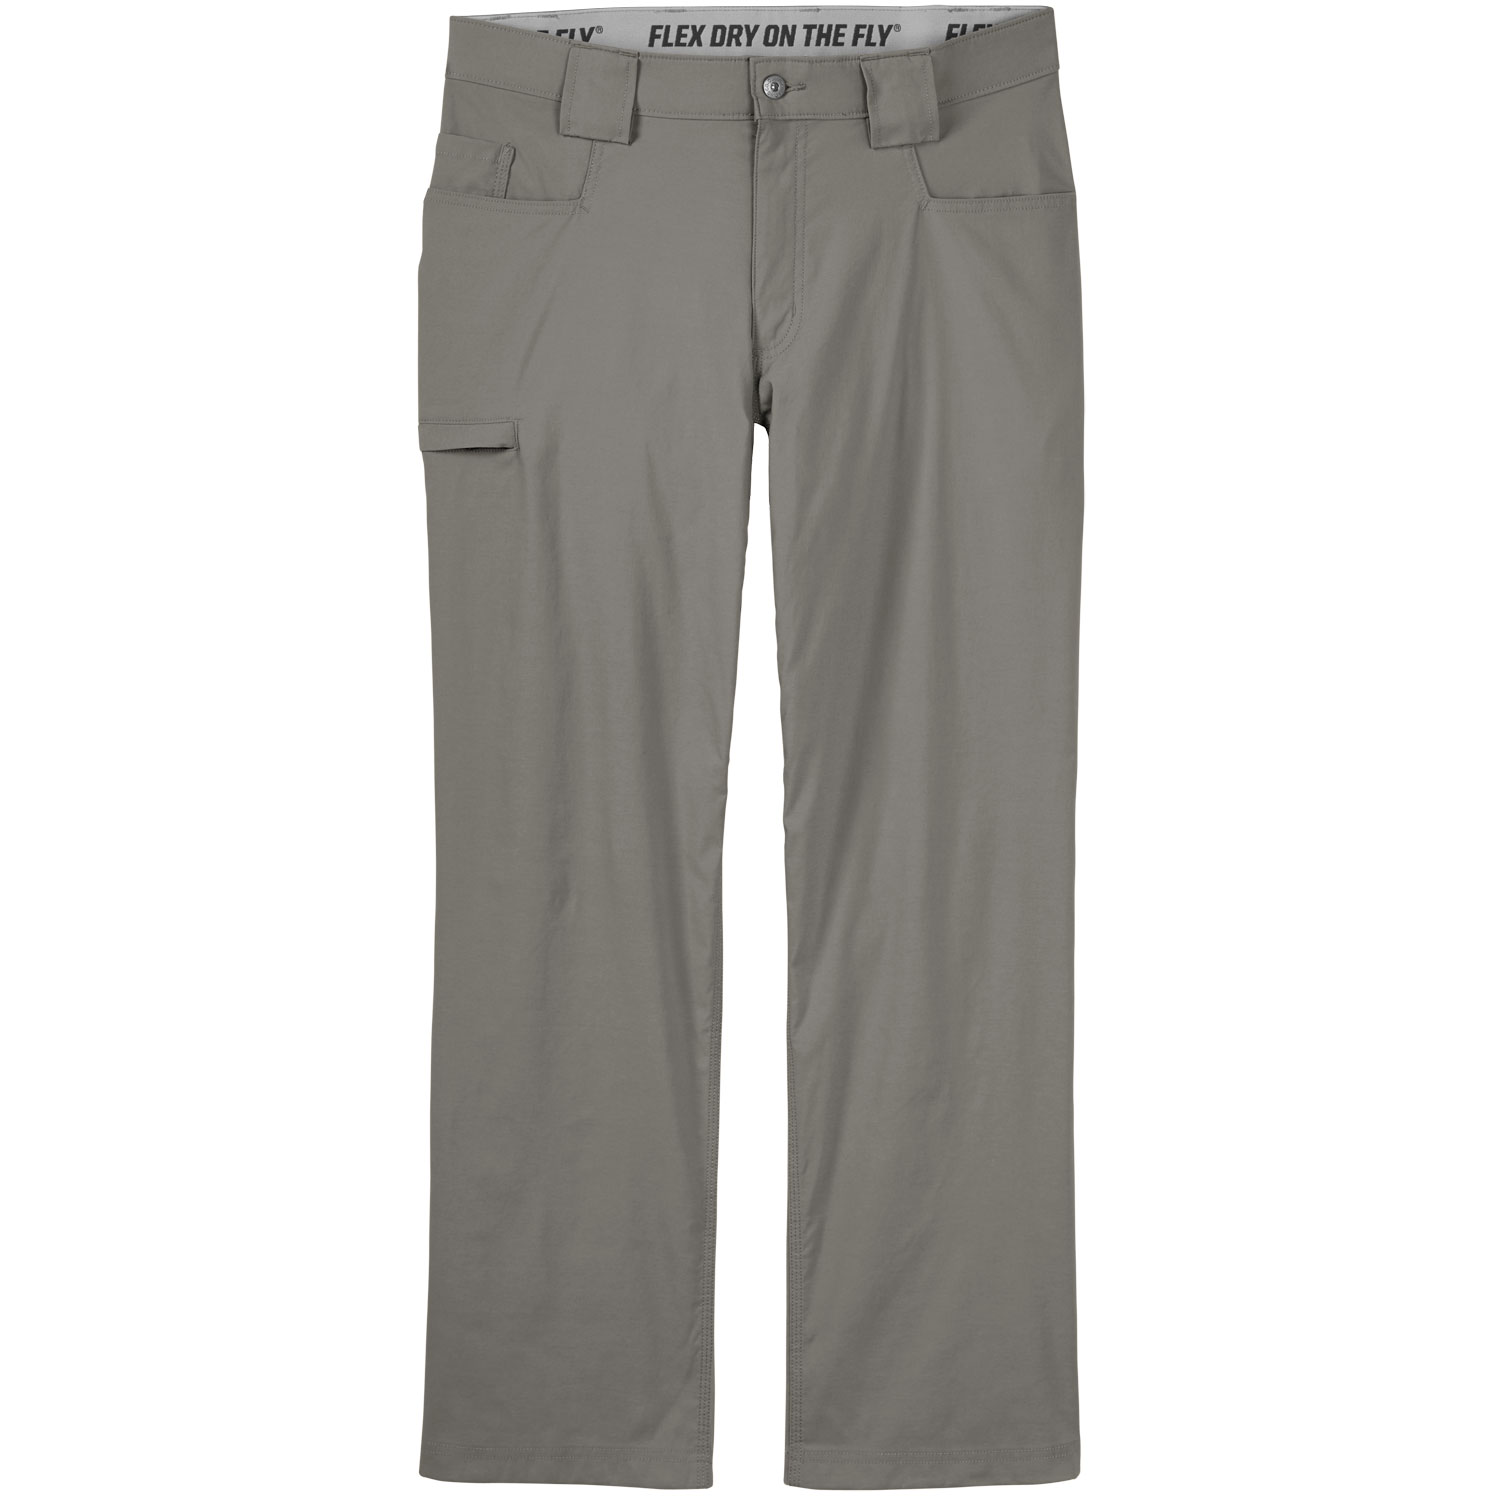 Men's DuluthFlex Dry on the Fly Relaxed Fit Pants | Duluth Trading Company